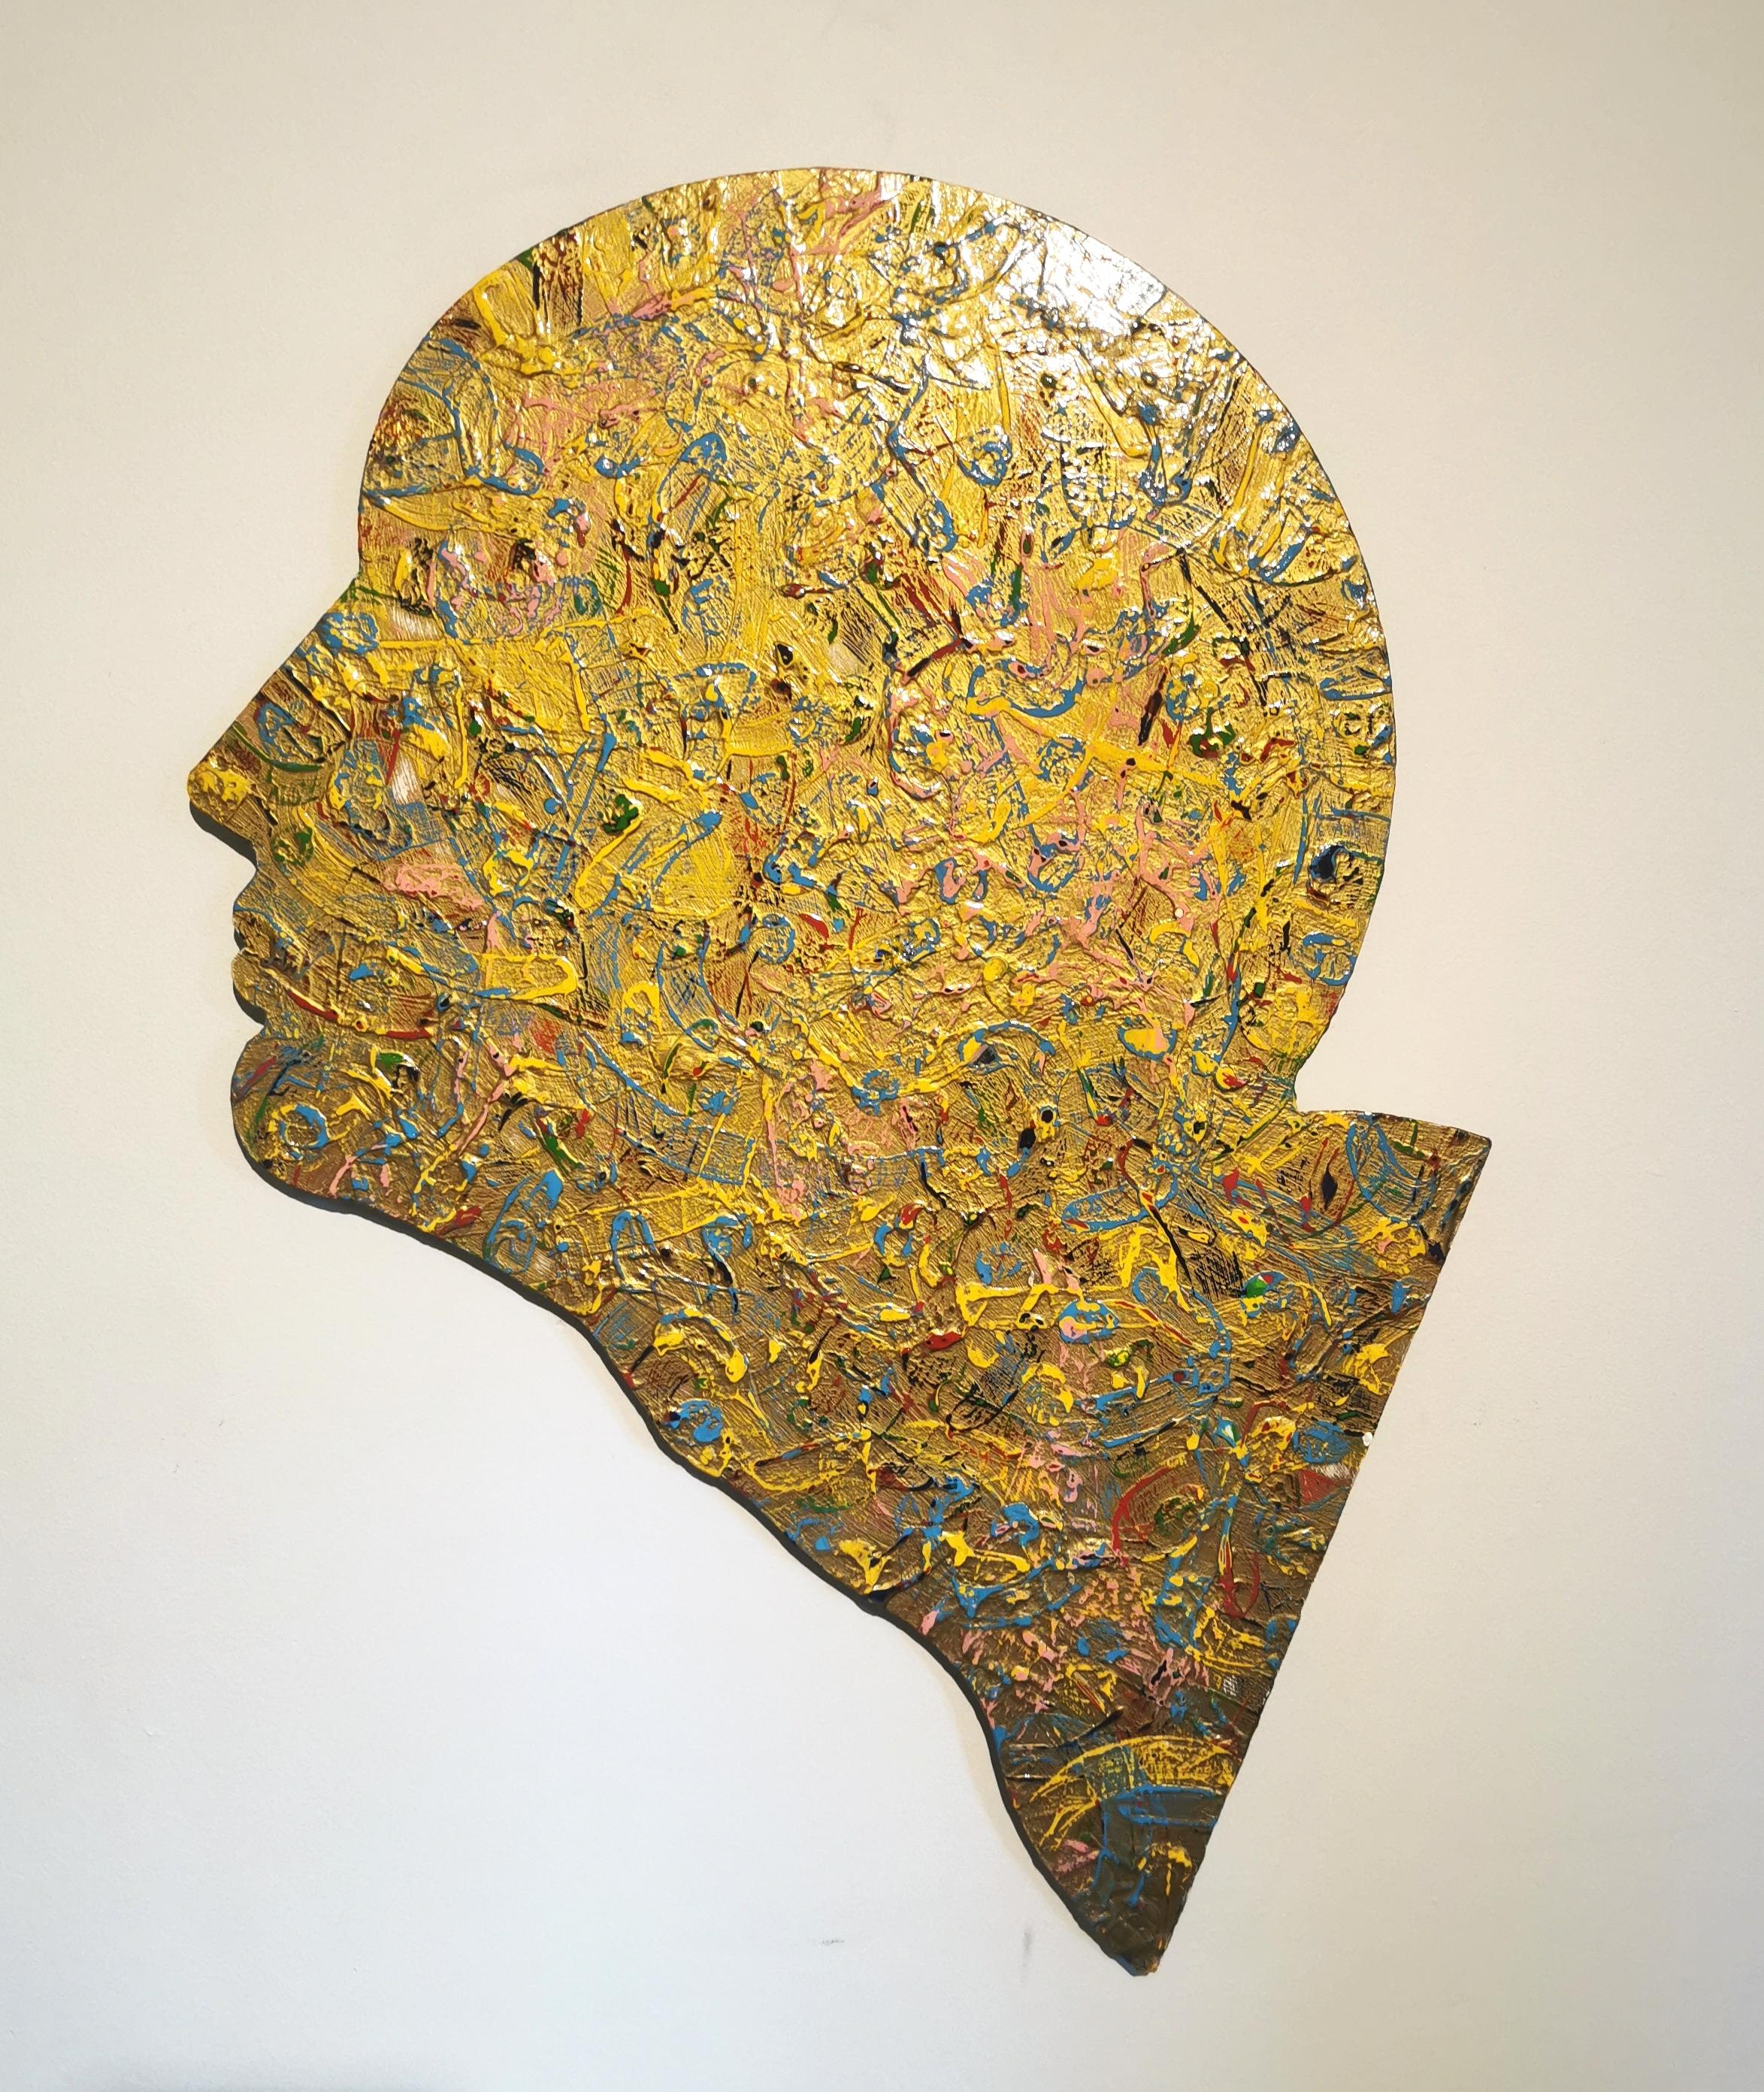 A unique,  wall mounted steel sculpture made of painted aluminium.  